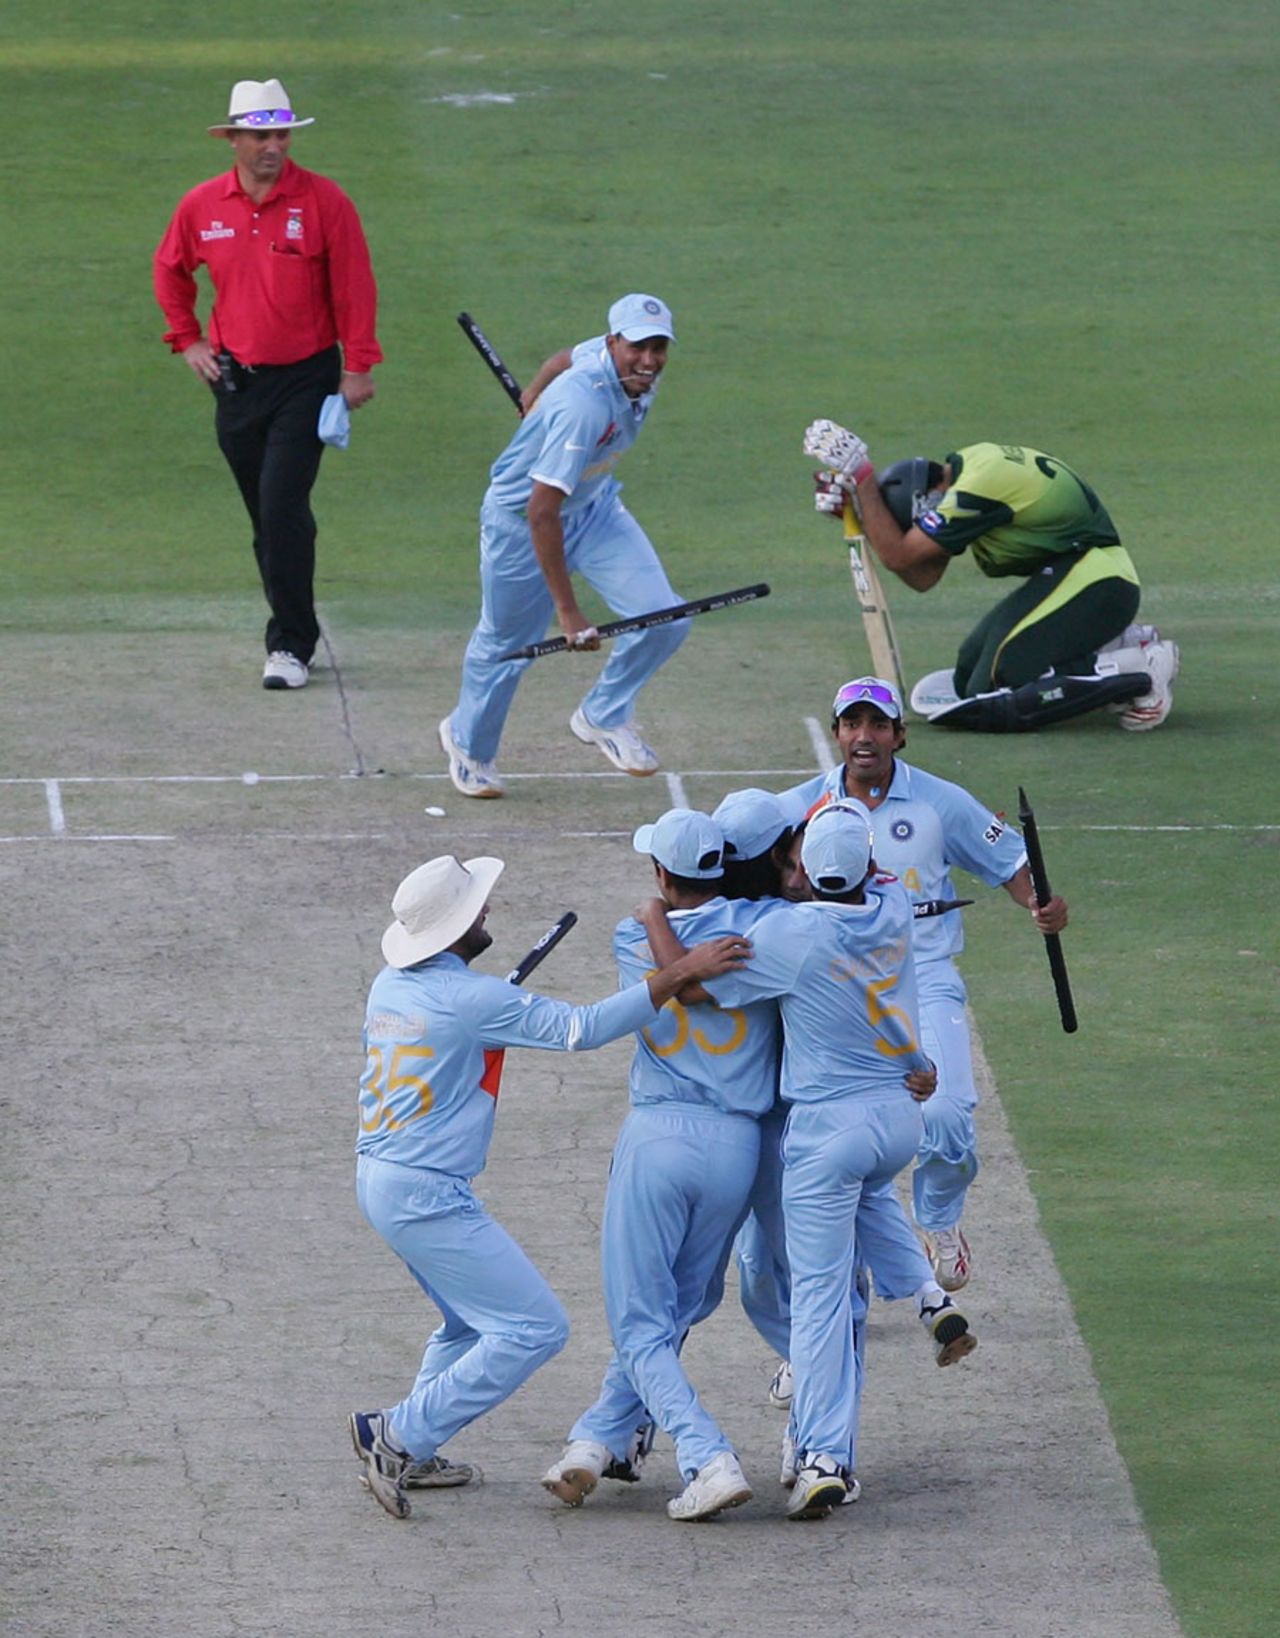 Joy and sorrow: Indians celebrate while Misbah-ul-Haq is left to ponder what could have been, India v Pakistan, ICC World Twenty20 final, Johannesburg, September 24, 2007